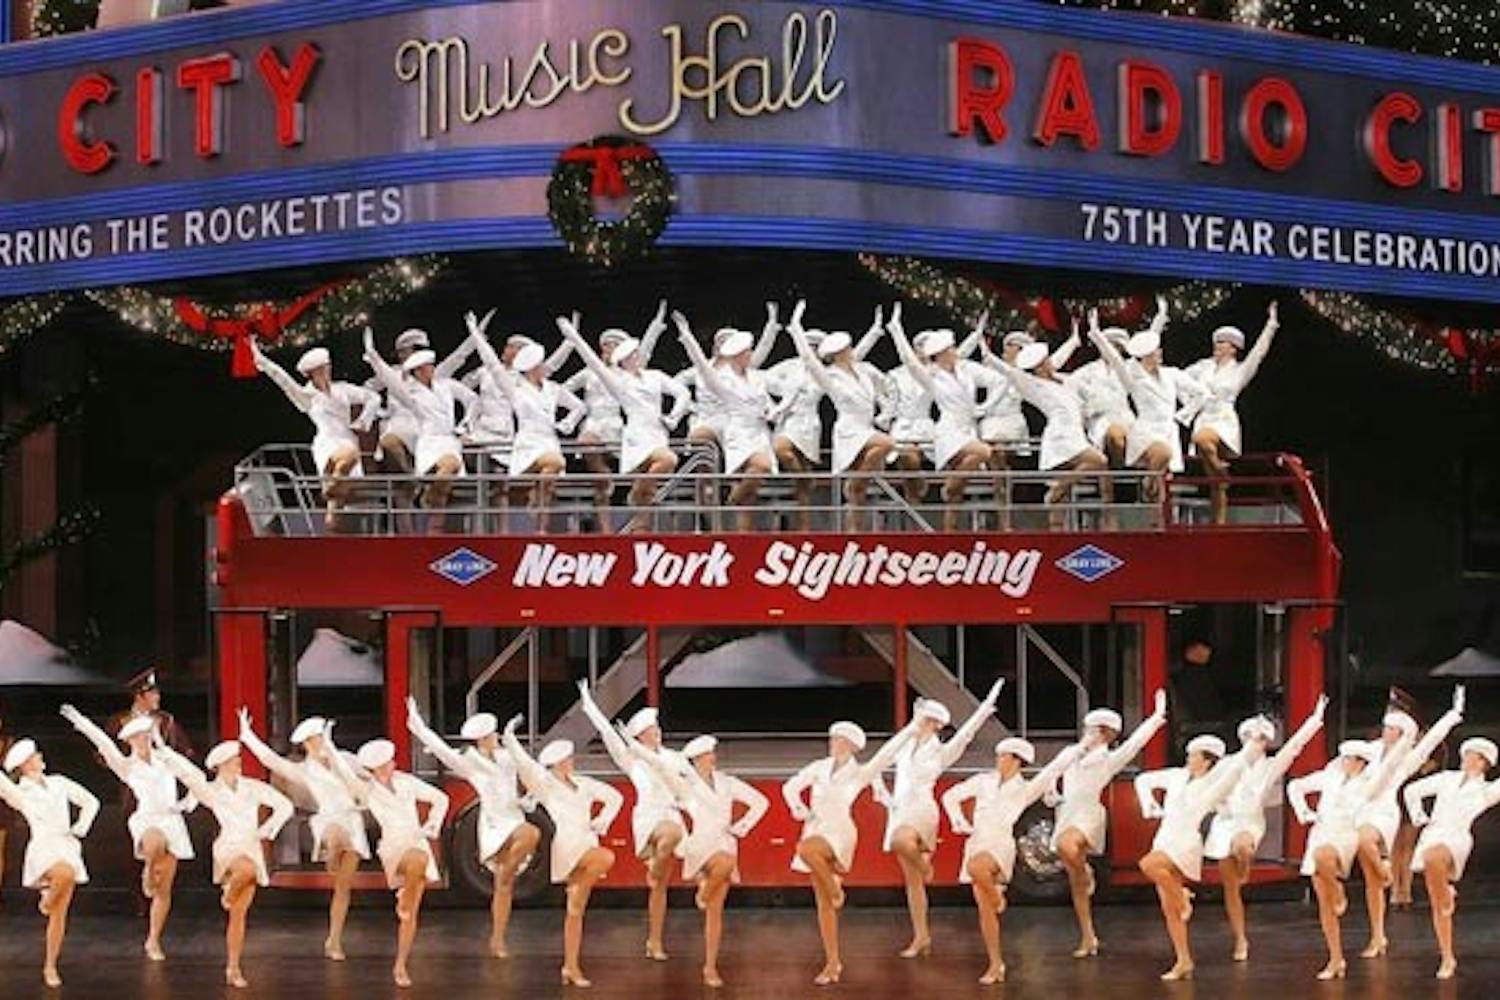 STILL GOING: The Radio City Rockettes perform on stage in New York City in 2008, celebrating seventy five years of performing the Radio City Christmas Spectacular. (Photo Courtesy of MSG Entertainment)